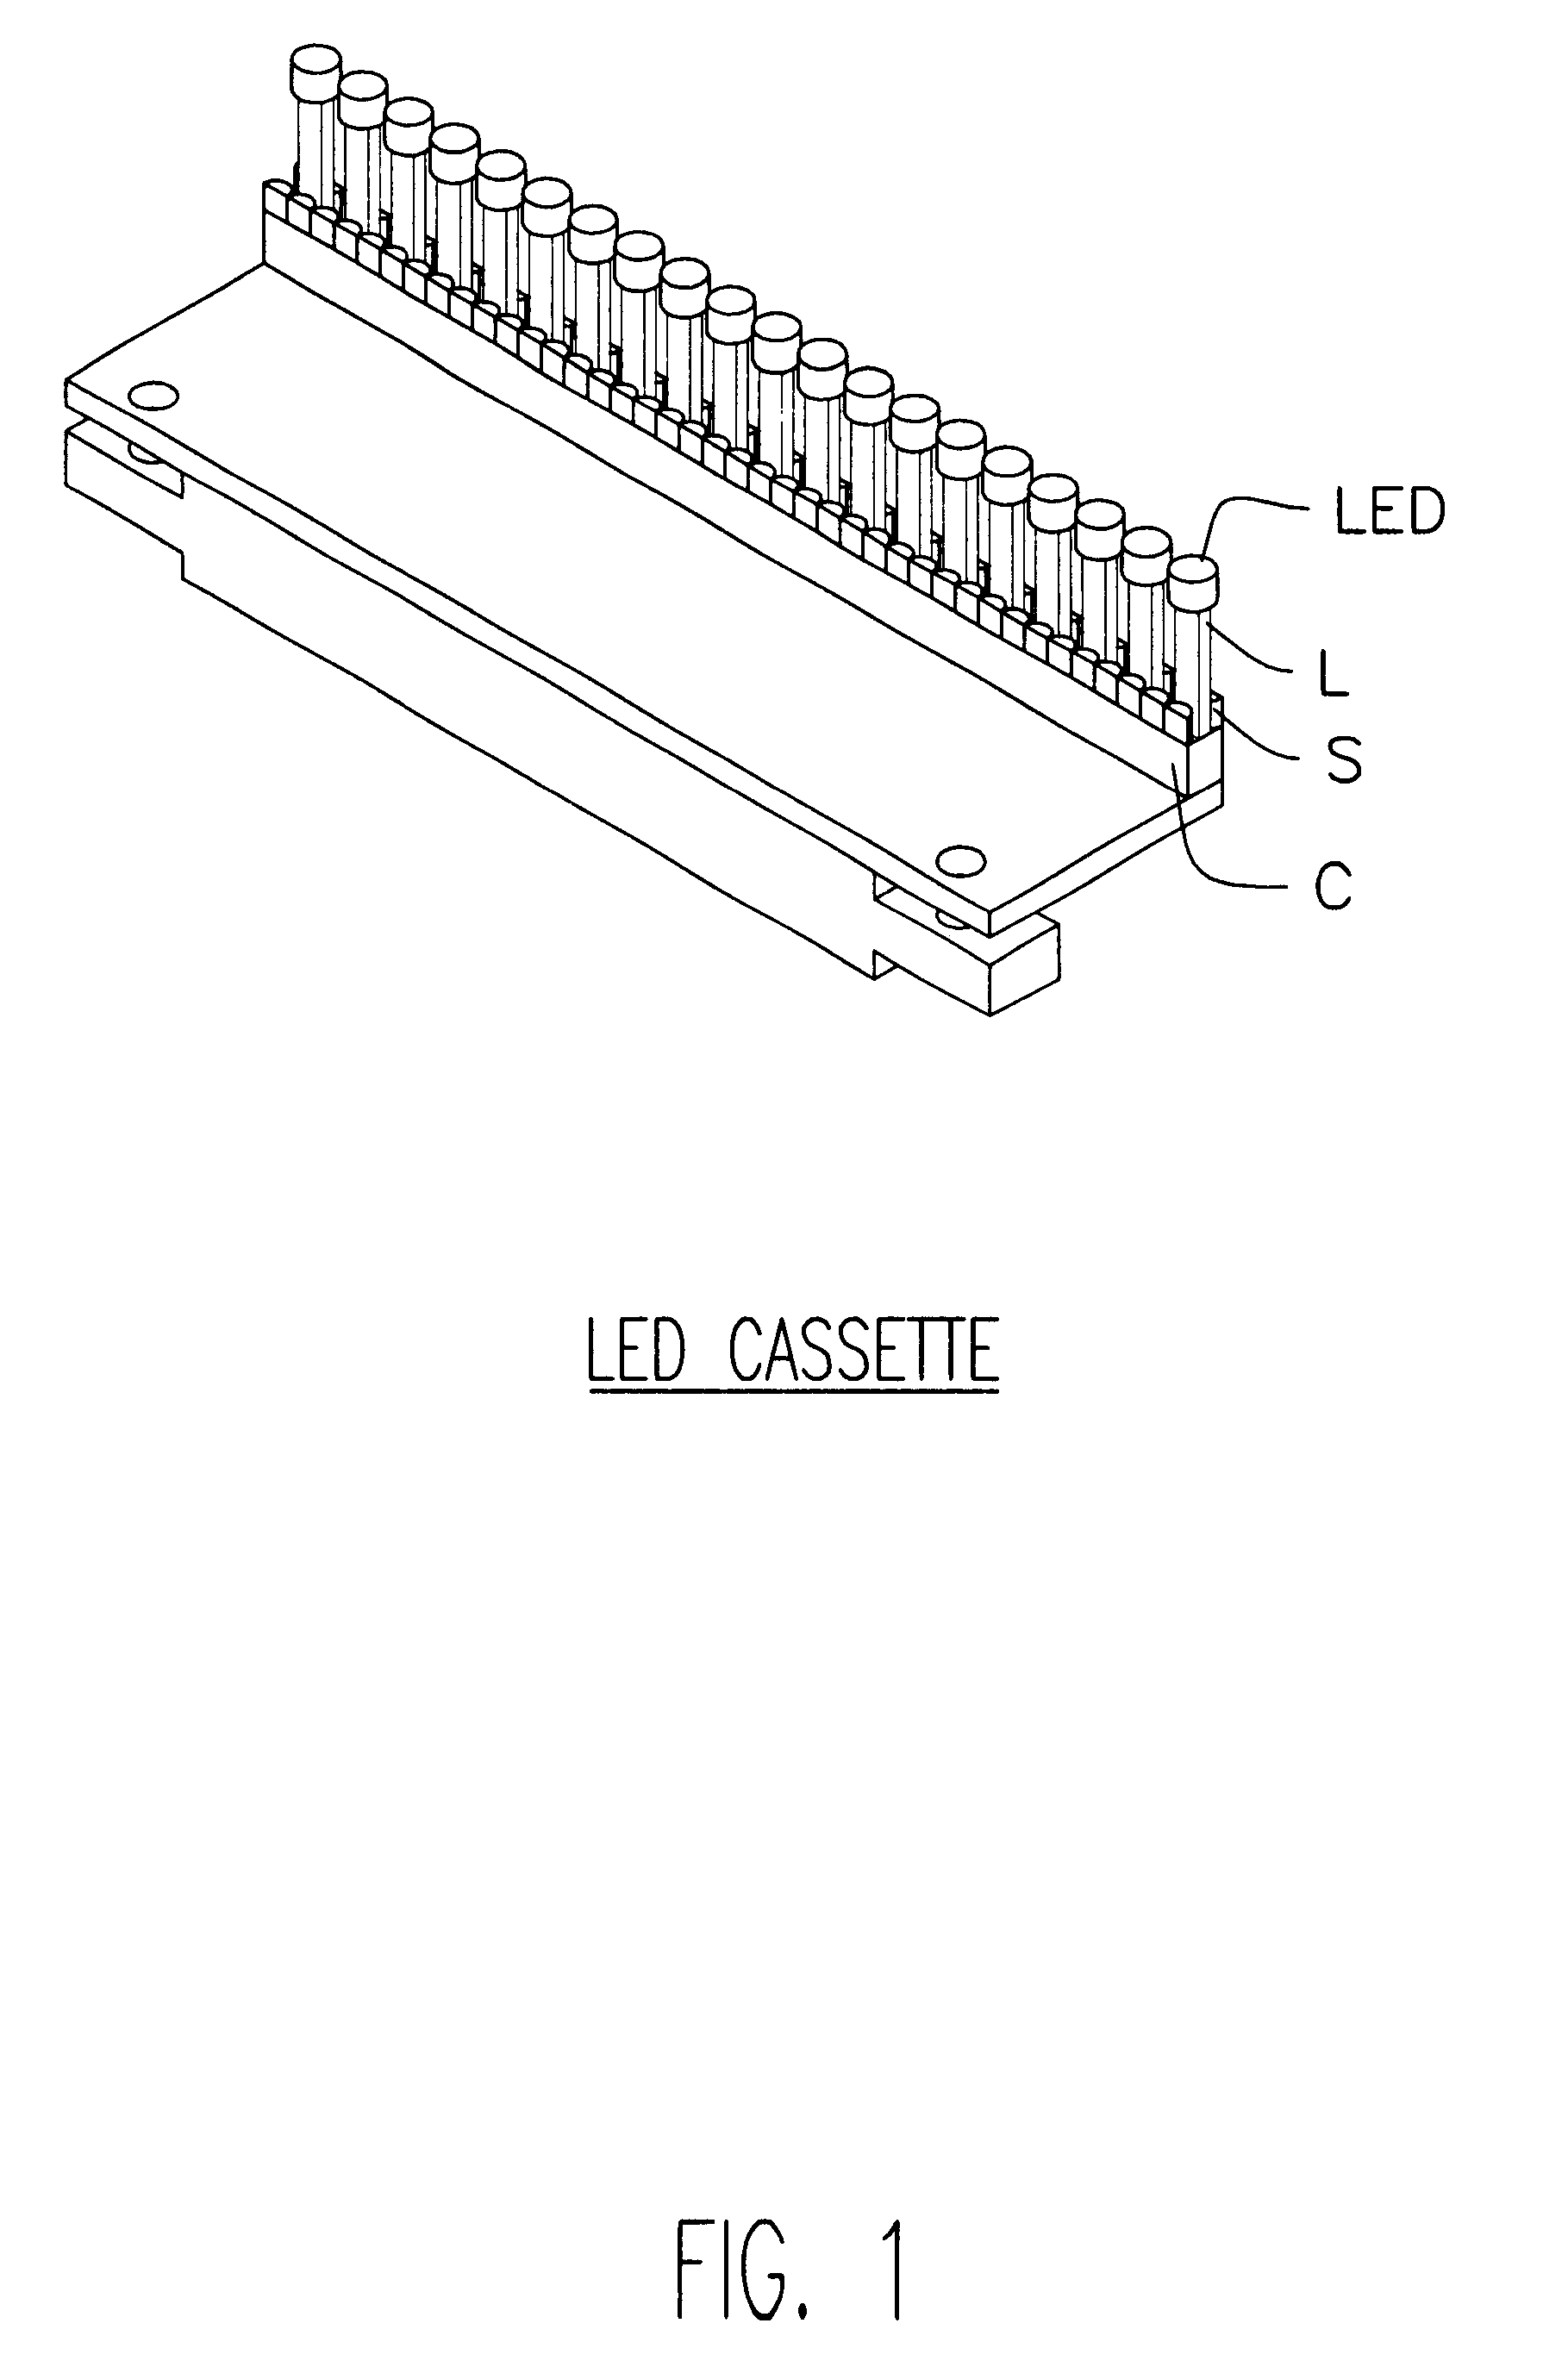 Method of and cassette structure for burn-in and life testing of multiple LEDs and the like